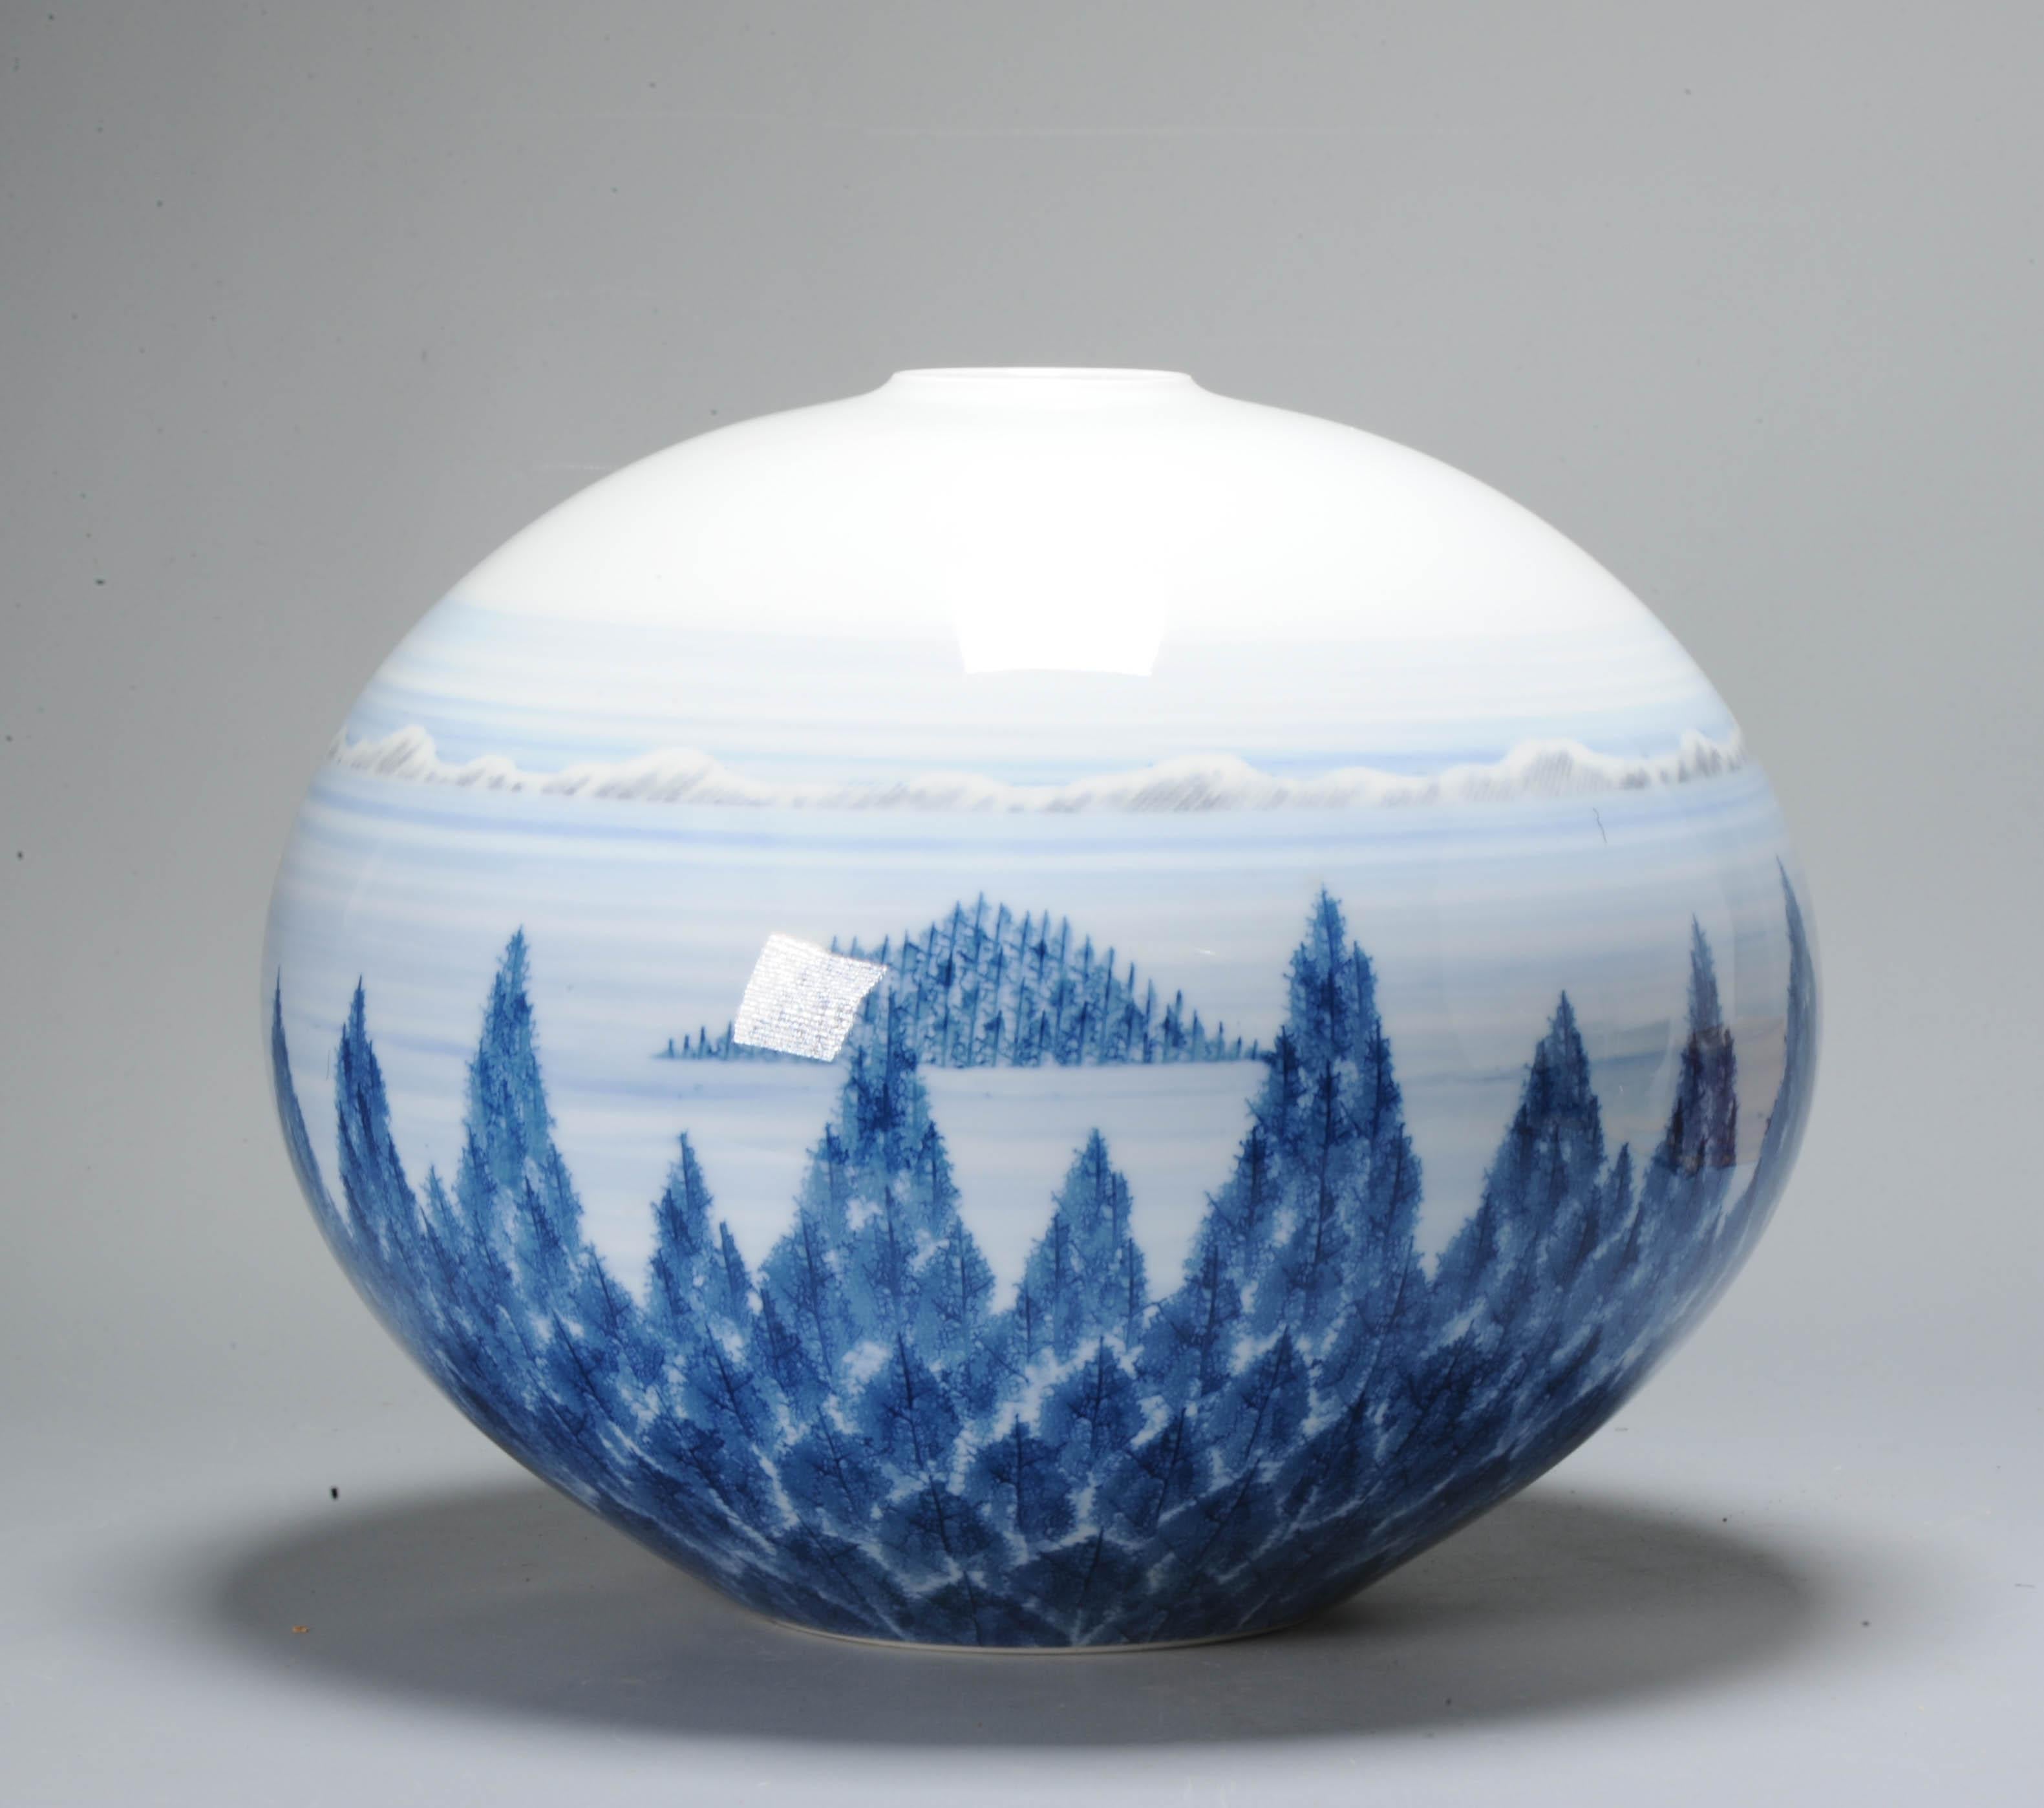 Lovely and rare piece with matching storage box.

A superb blue and white porcelain vase, with a landscape. Made by Fuji Shumei

Fujii Mr. Aki Fujii's specialty is the technique of drawing a mountain by simulating the veins of a leaf, called the